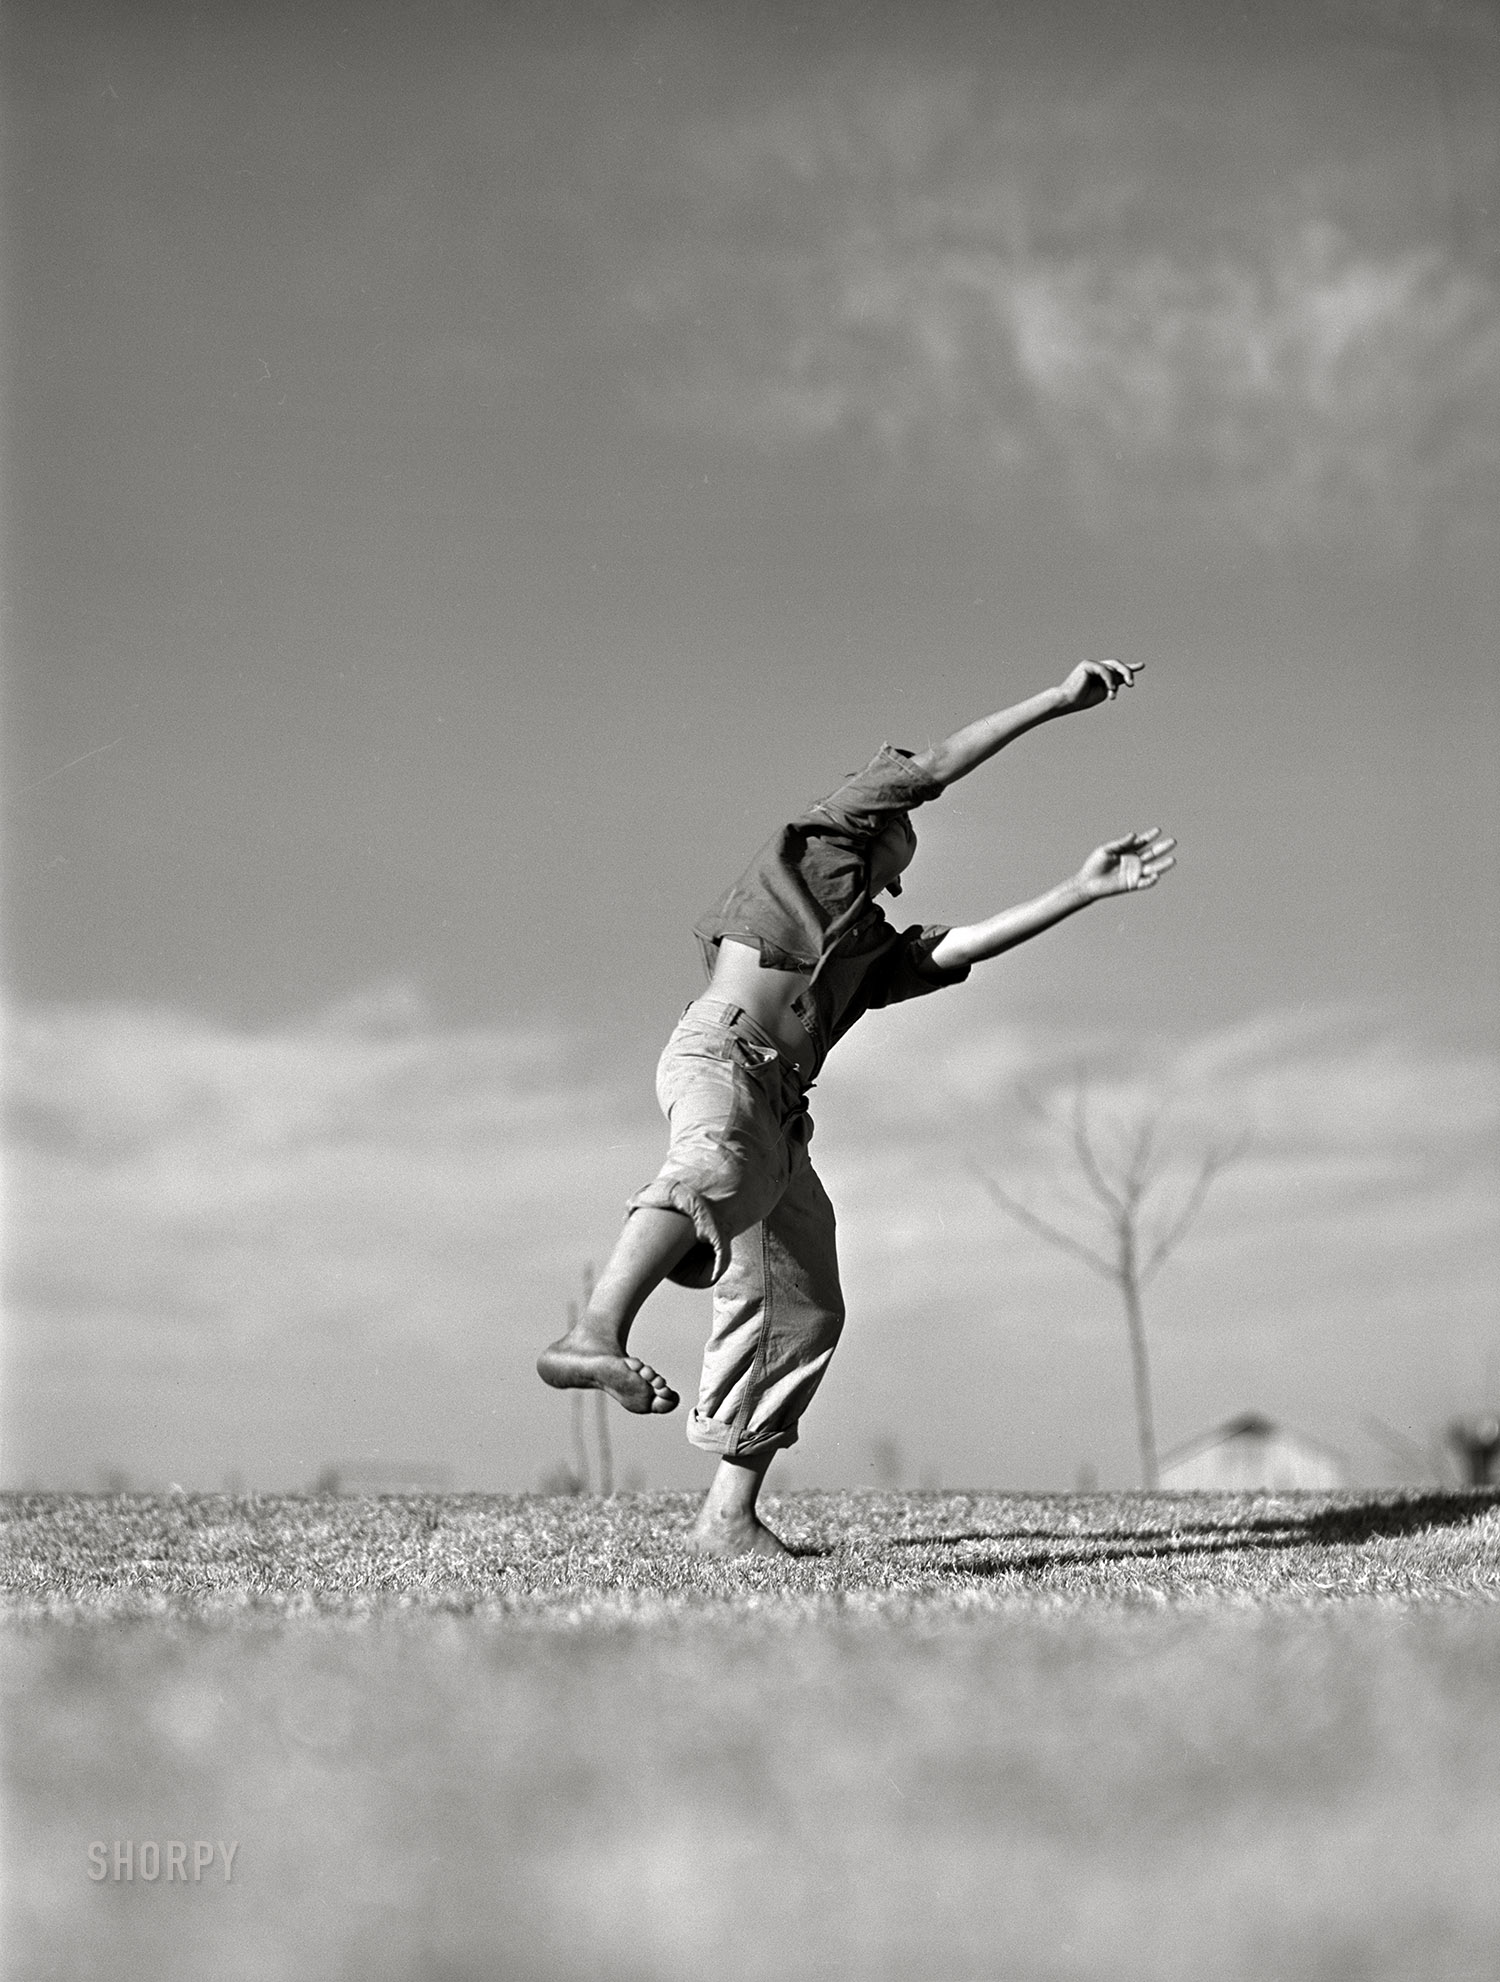 January 1942. "Flying model airplane. Farm Security Administration camp at Robstown, Texas." Medium format acetate negative by Arthur Rothstein. View full size.